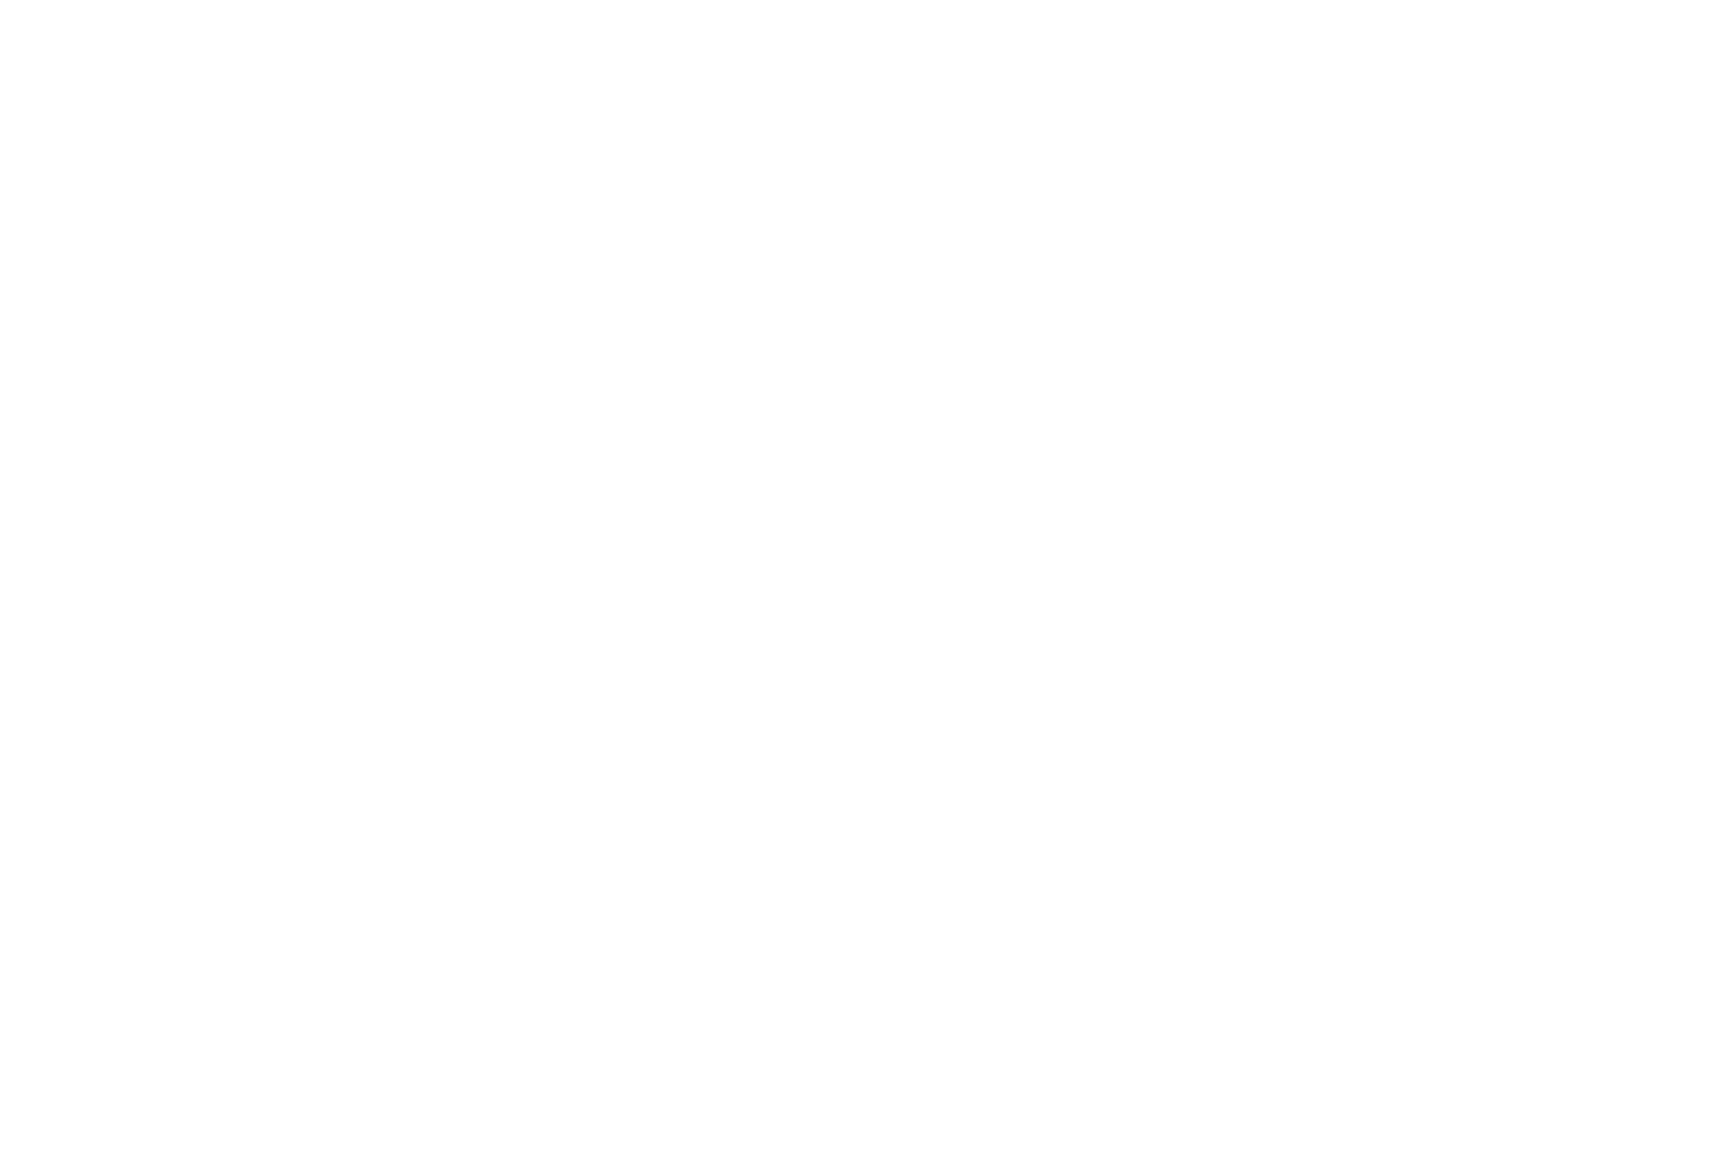 OFFICIAL SELECTION - Toronto Independent Film Festival of Cift - 2020.png